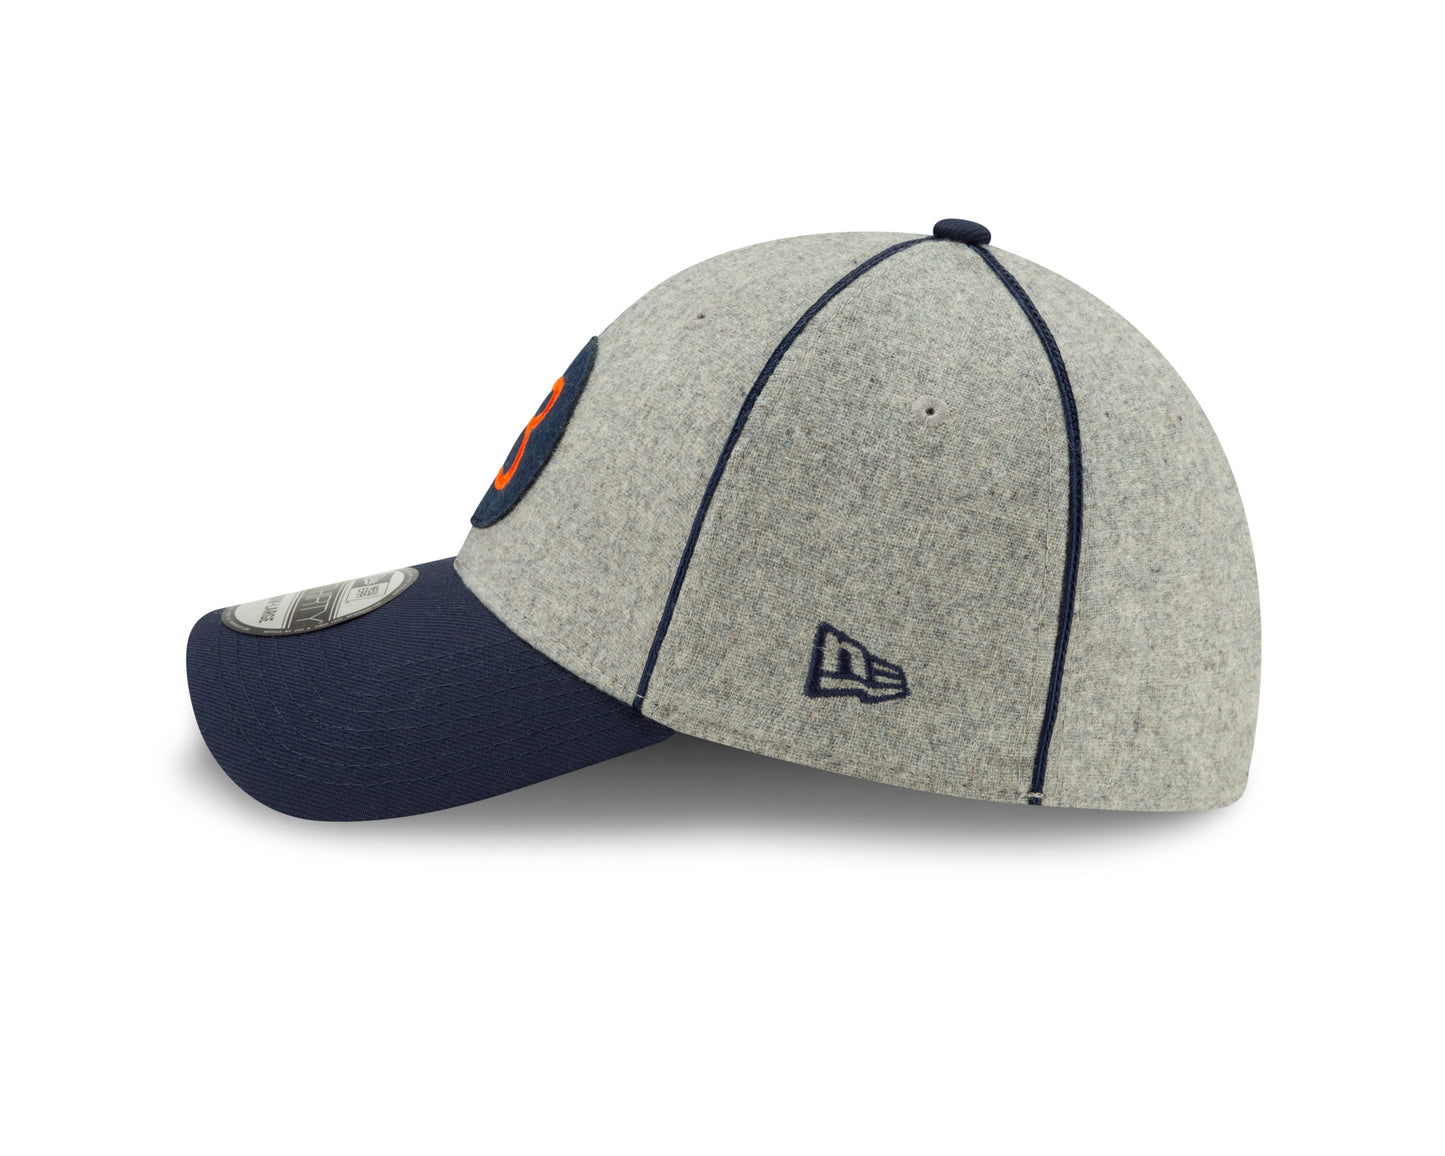 Chicago Bears 2019 Established Collection Sideline 1920 Home "B" Logo Gray/Navy 39THIRTY Flex Hat